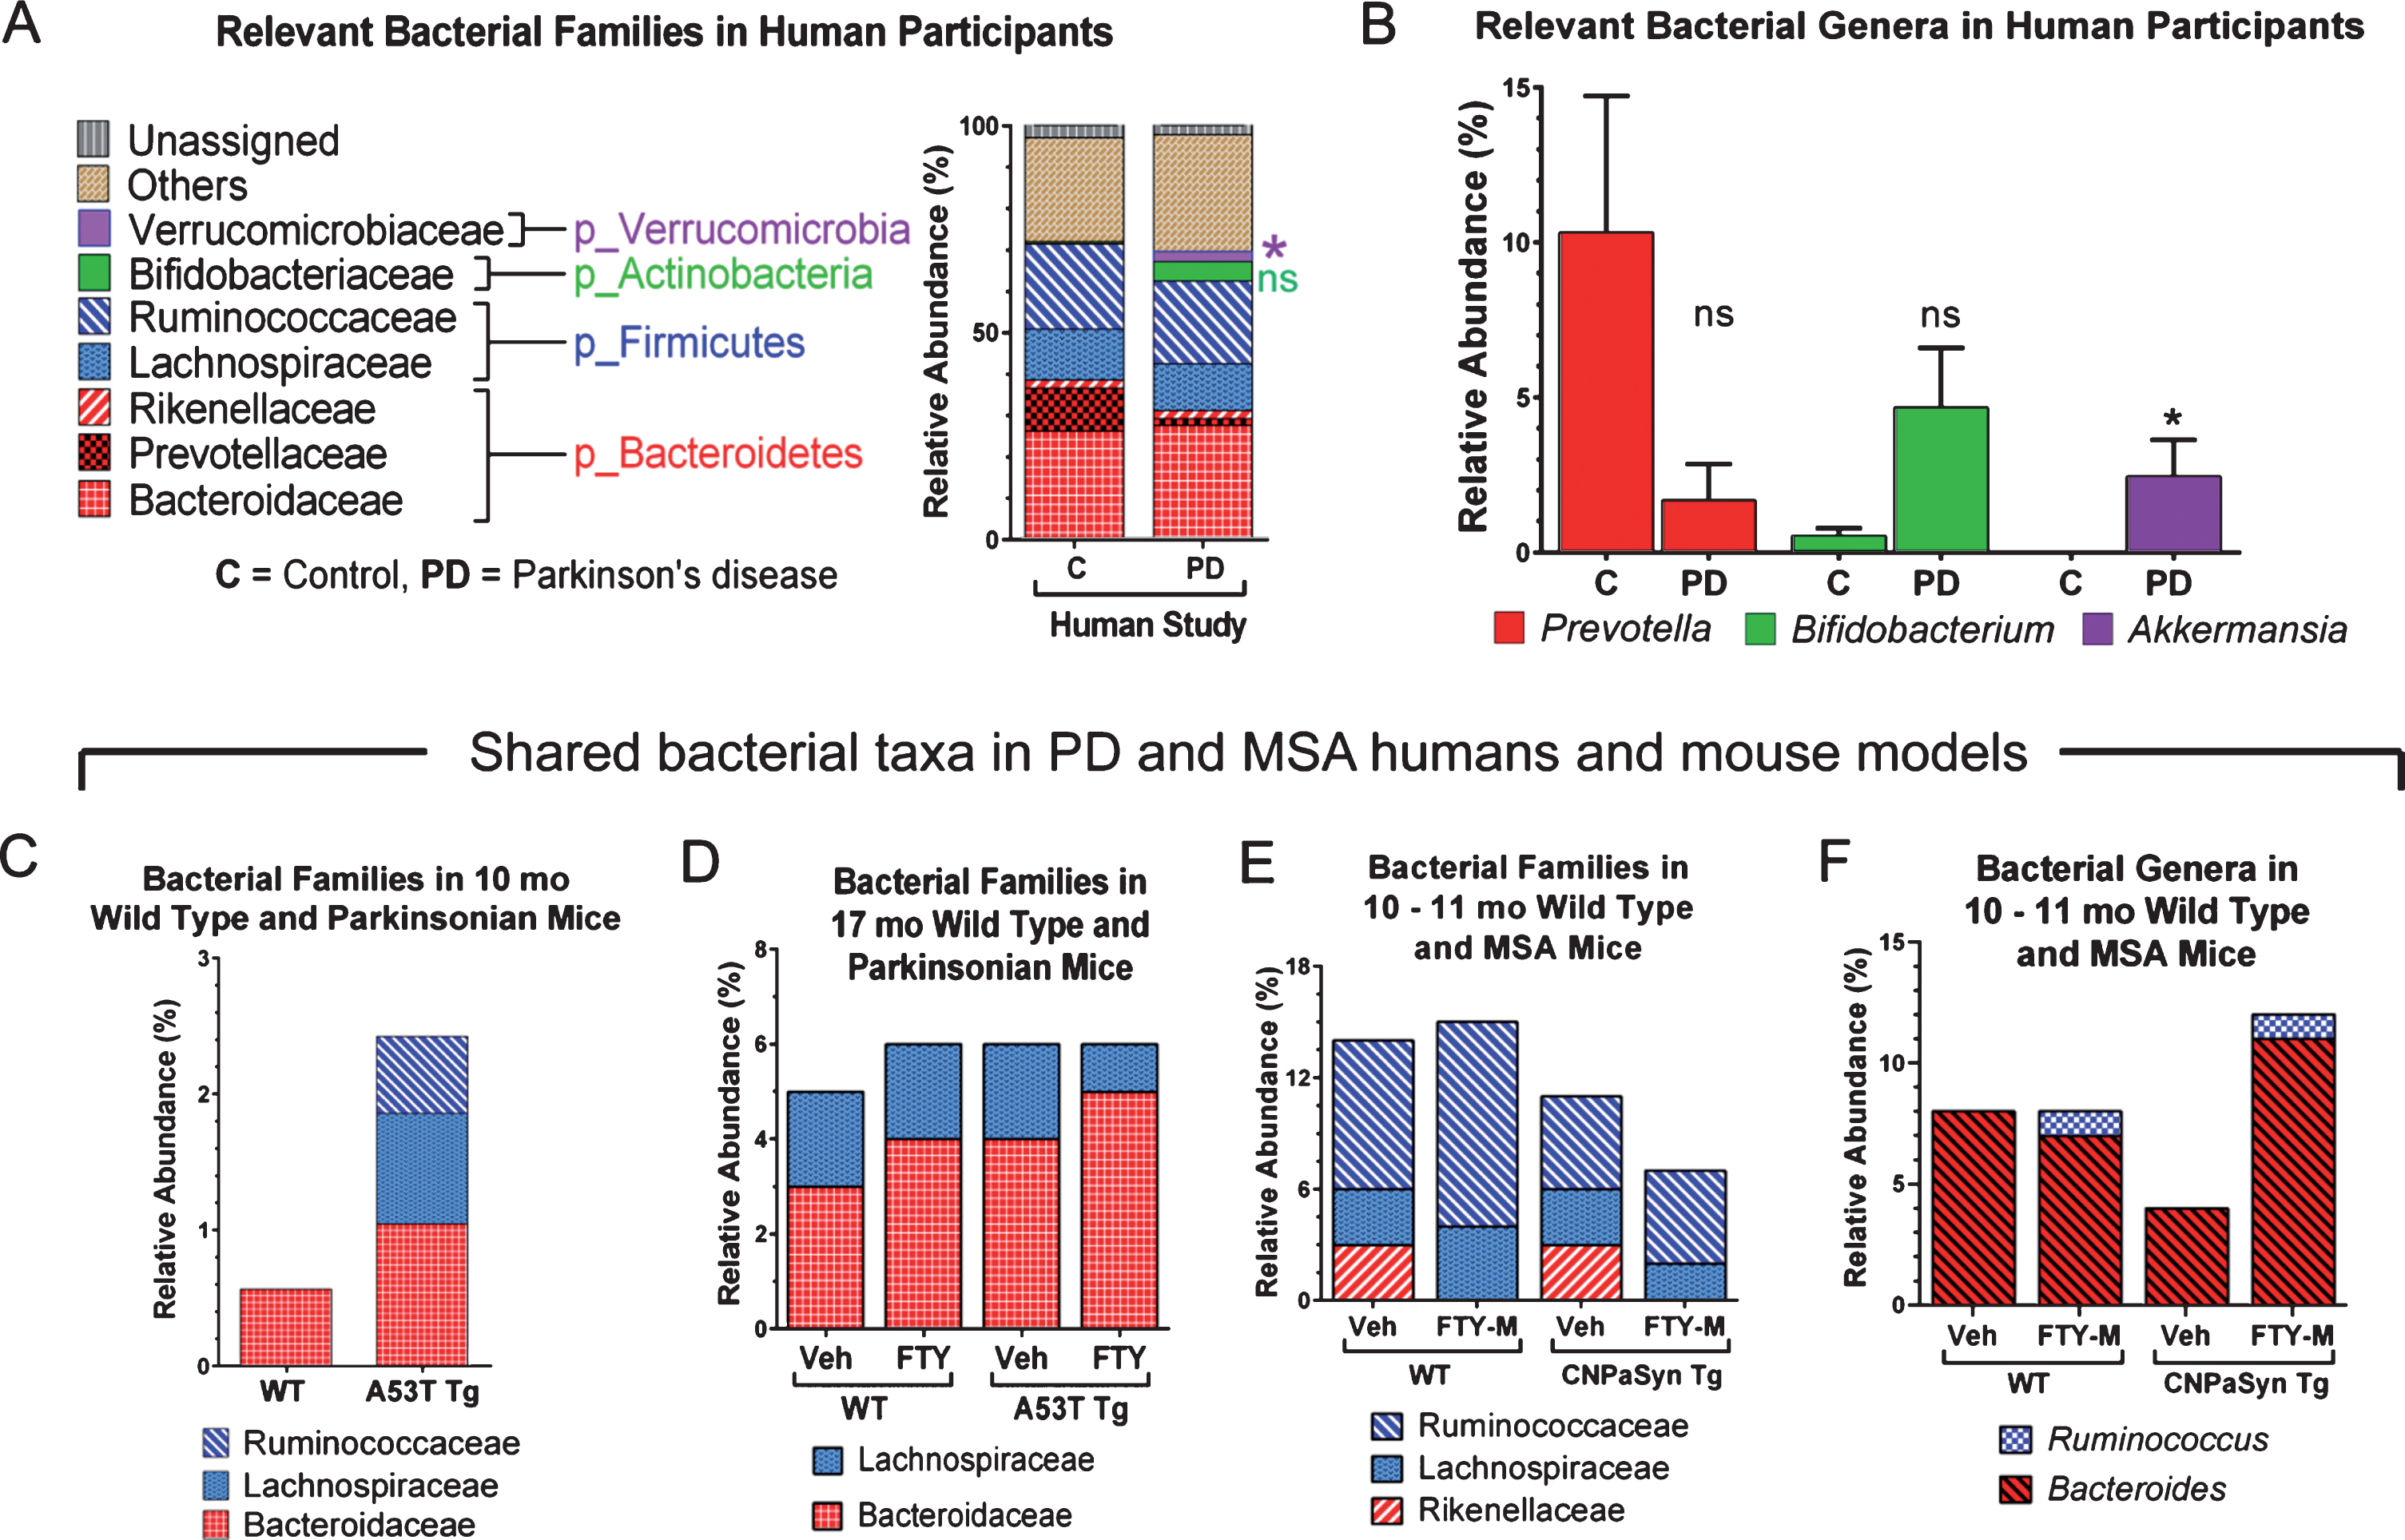 Relative abundance of gut microbial taxa in pilot studies of human PD, and in PD and MSA mouse models and effects of FTY720 (FTY) or FTY720-Mitoxy (FTY-M) on mouse gut microbiota. This figure only shows data relevant to PD and MSA. (A) At the family level Verrucomicrobiaceae (*p < 0.05) is present only in PD subjects and Bifidobacteriaceae (ns) is increased in PD compared to control subjects. (B) The genus Prevotella is notoriously reduced in PD, while Bifidobacterium and Akkermansia are more abundant in PD than in control subjects; ns, not significant, *p < 0.05, Two-tailed Mann-Whitney U Test. Taxa shared by humans and mice in C – F show the mean % relative abundance (RA) only, as raw data were unavailable for statistical analyses. (C) Families Ruminococcaceae and Lachnospiraceae are only present in 10 mo old A53T transgenic (Tg) mice compared to age matched wild type (WT) mice. (D) At 17 mo, family Bacteroidaceae is somewhat increased in WT and Tg mice after FTY, while family Lachnospiraceae is somewhat reduced in response to FTY in Tg mice. (E) In CNP-aSyn MSA mice, family Rikenellaceae is present only in vehicle (Veh) treated WT and Tg CNP-aSyn mice, but absent in FTY-M treated mice; while Ruminococcaceae family tended to increase in WT FTY-M treated mice. (F) The genus Ruminococcus is present only in FTY-M treated WT and MSA CNP-aSyn Tg mice while the genus Bacteroides increases only after FTY-M in the CNP-aSyn Tg MSA mice. Taxa are color coded according to phyla. Unassigned = non-bacterial fecal components, Other = unidentified bacteria at that particular taxonomic level or bacteria that are not considered relevant to PD or MSA.